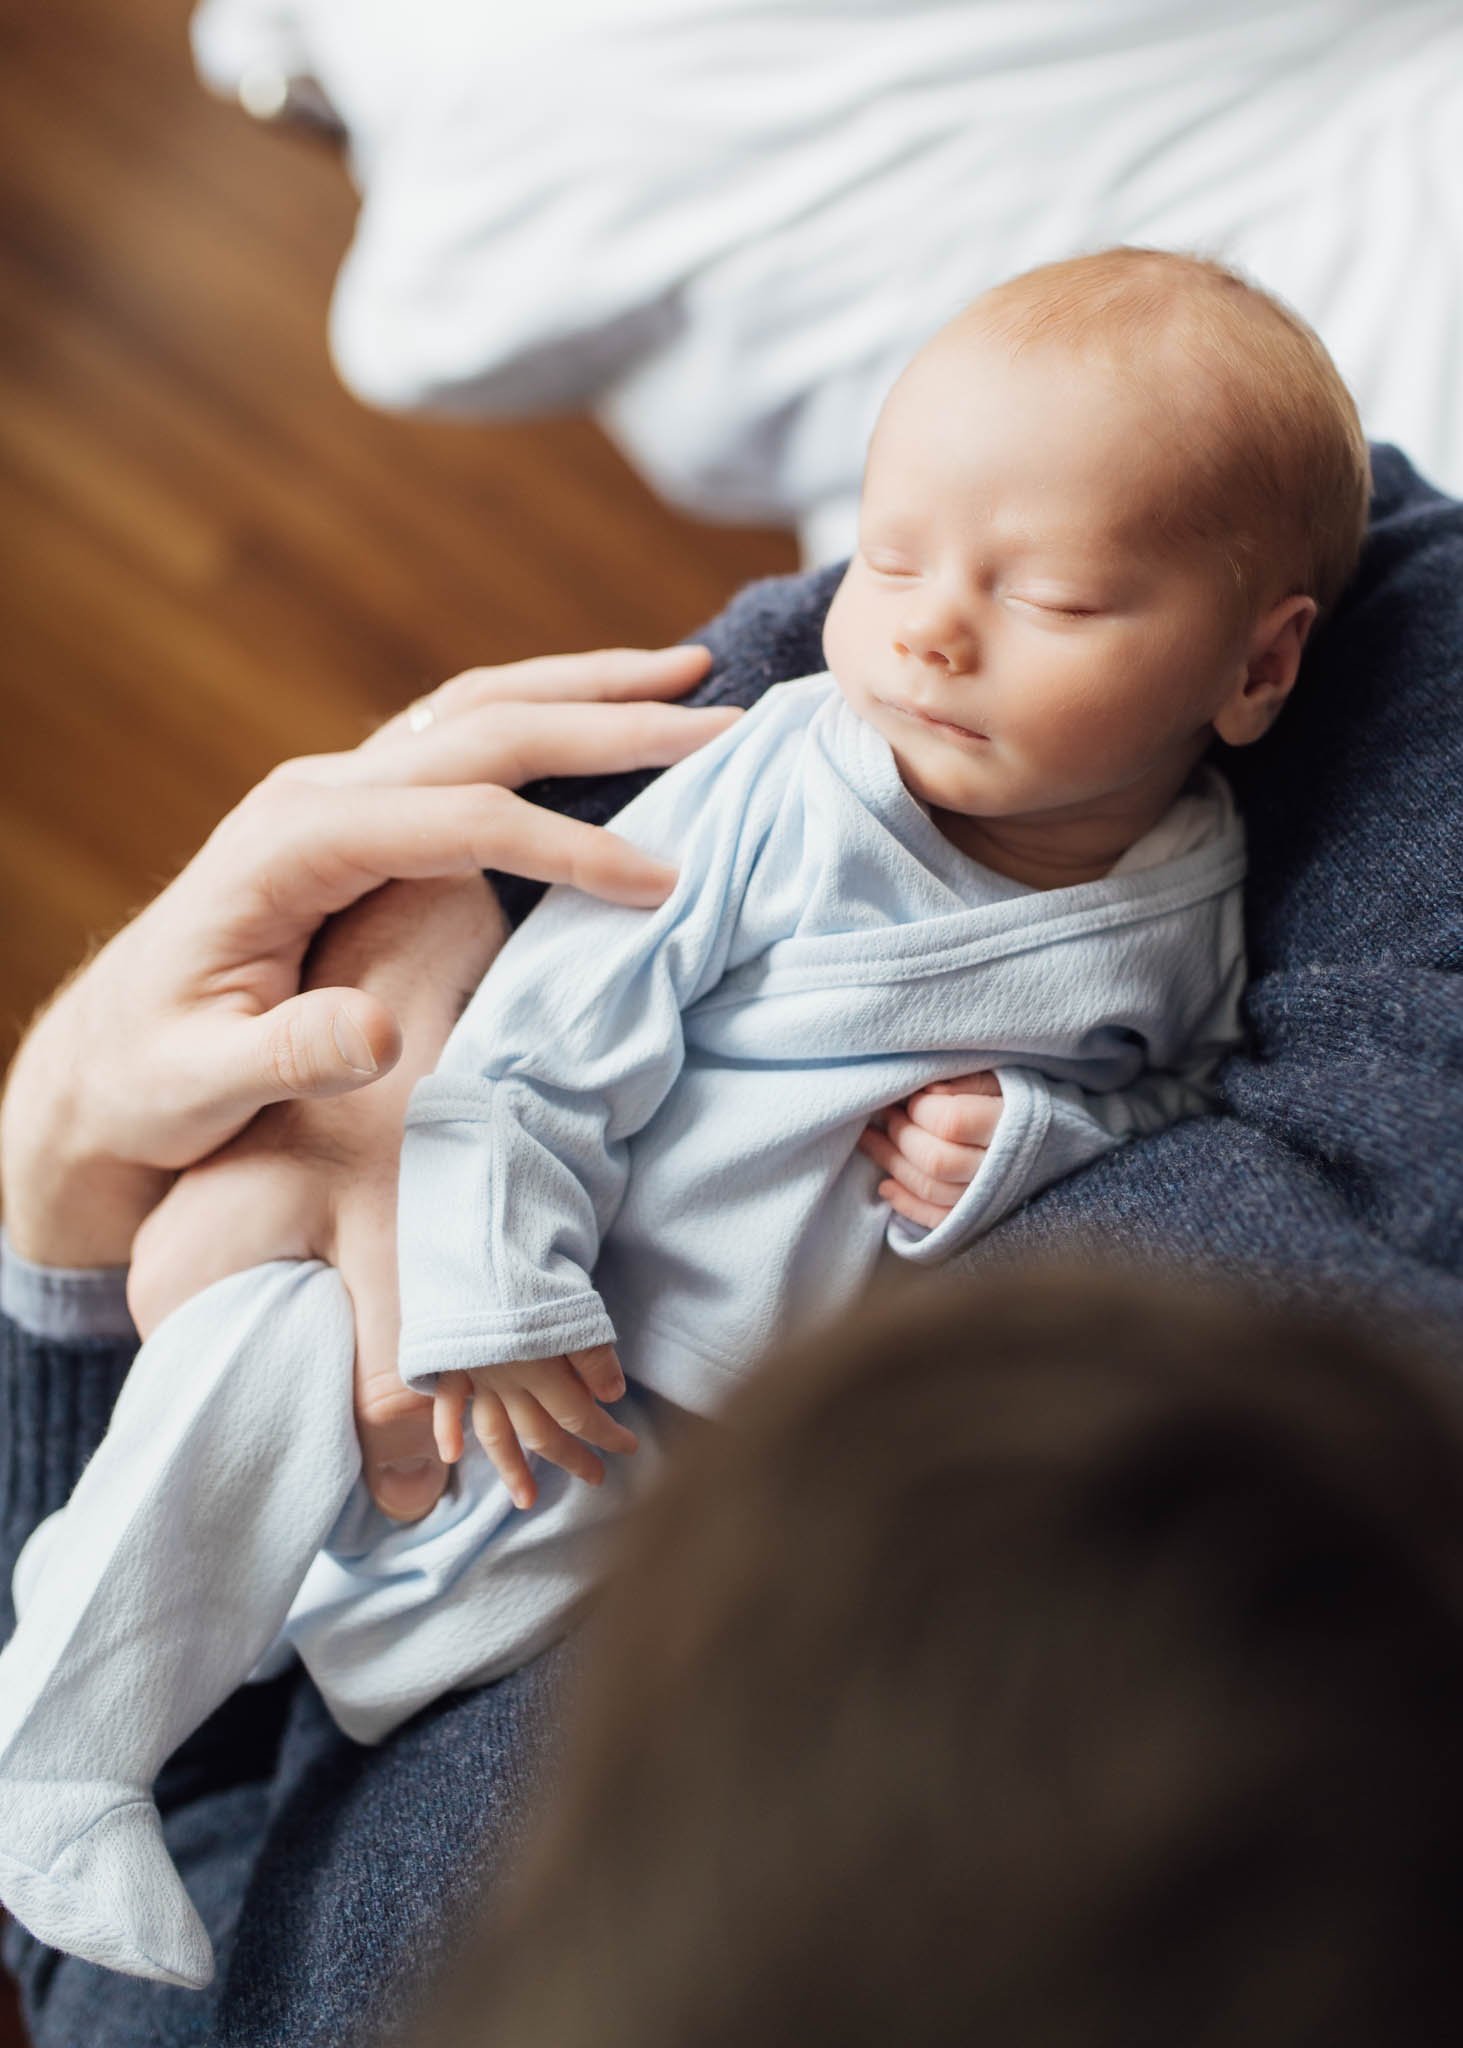 Baby boy in blue outfit being held by dad